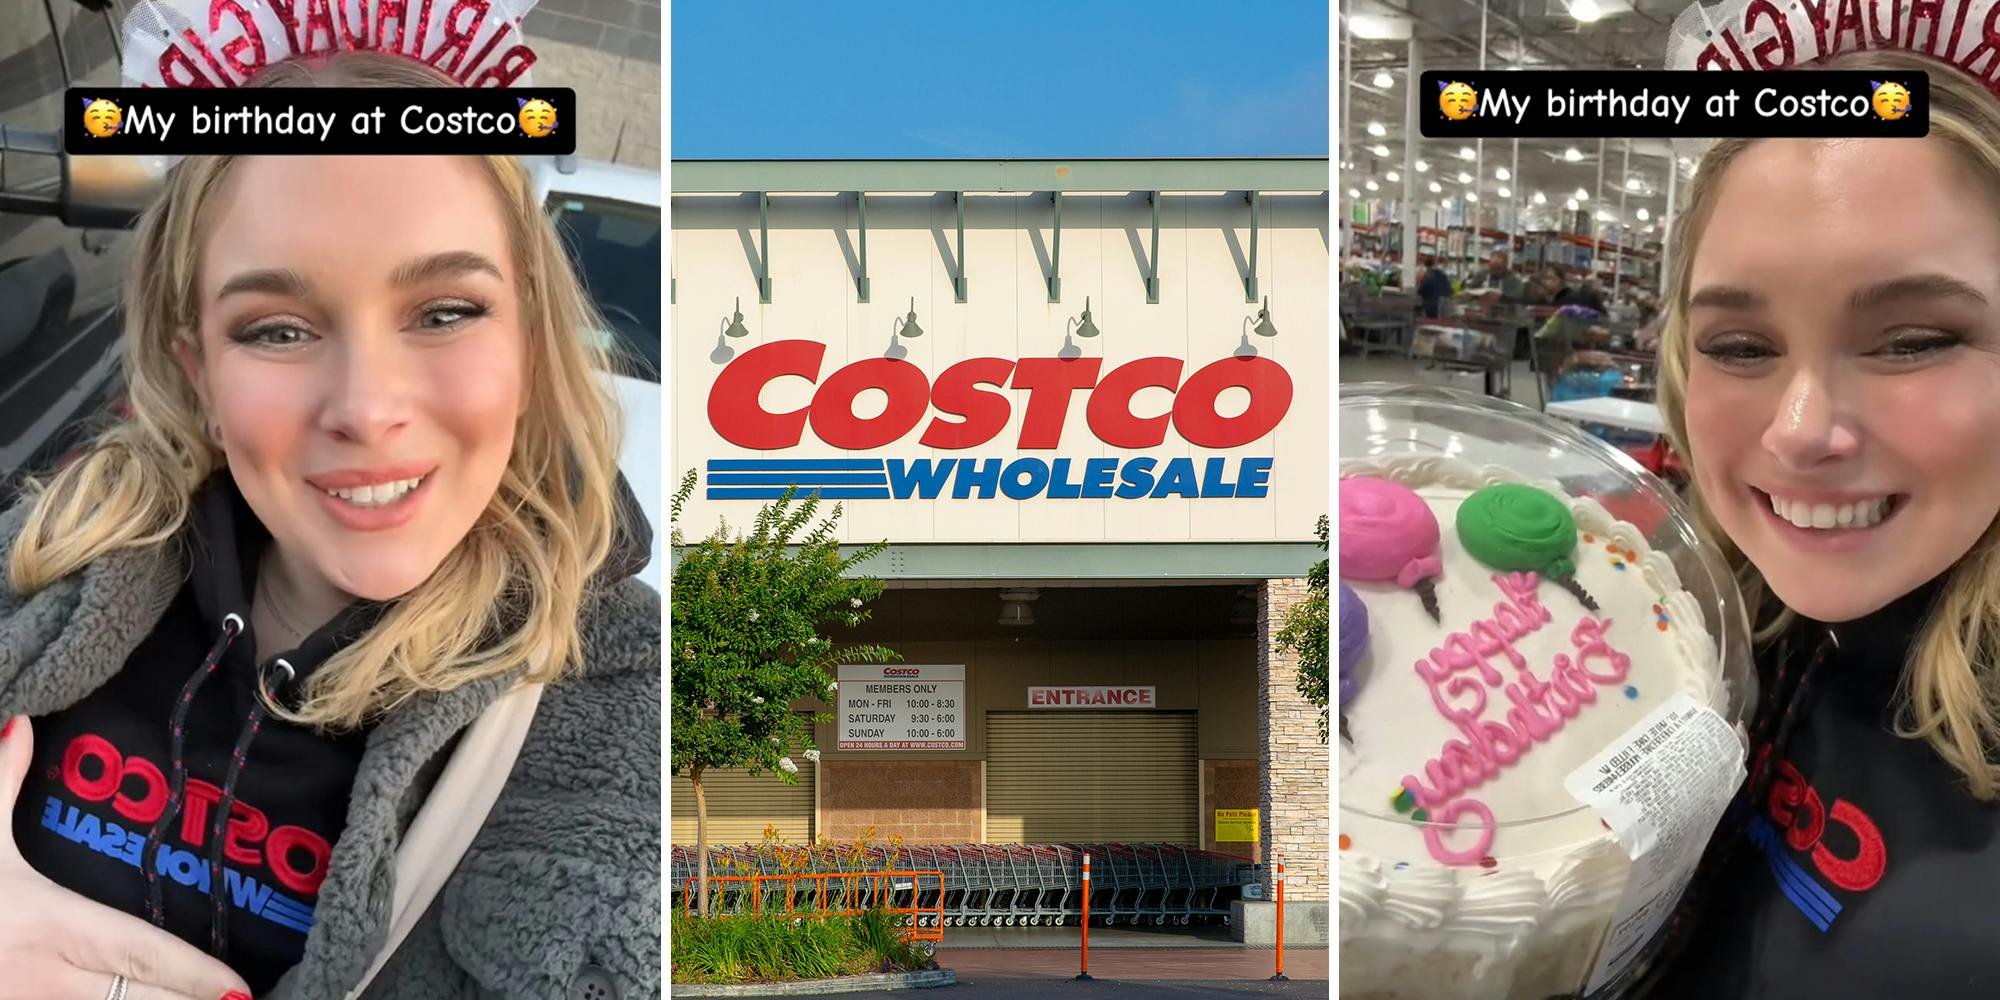 Woman goes to Costco for her birthday. It’s more common than you think